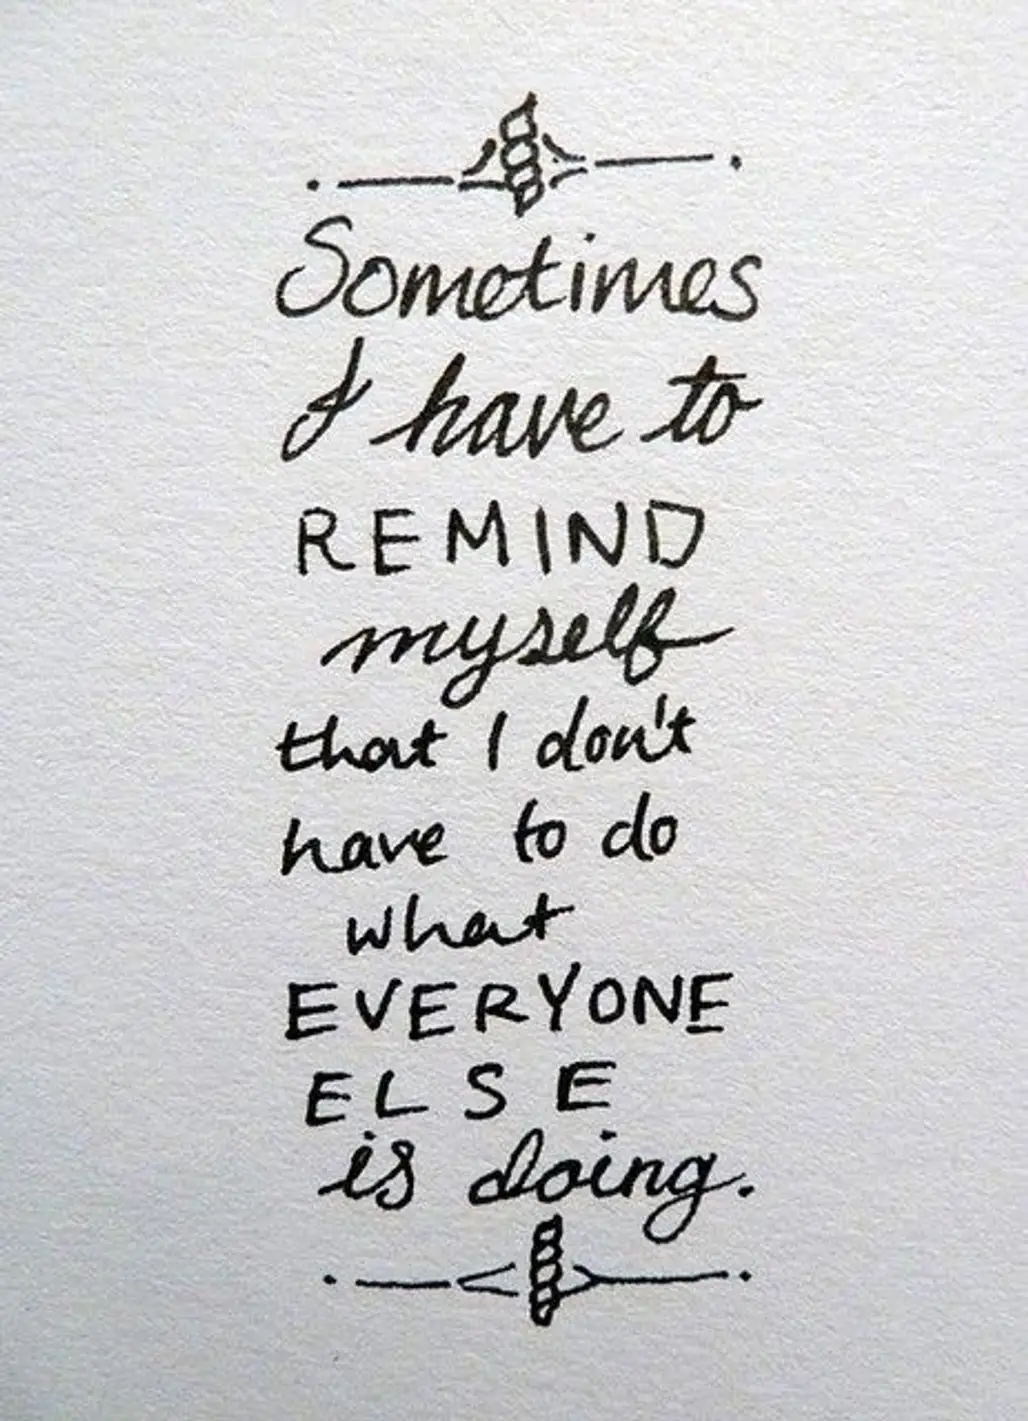 Sometimes, I Have to Remind Myself That I Don’t Have to do What Everyone else is Doing